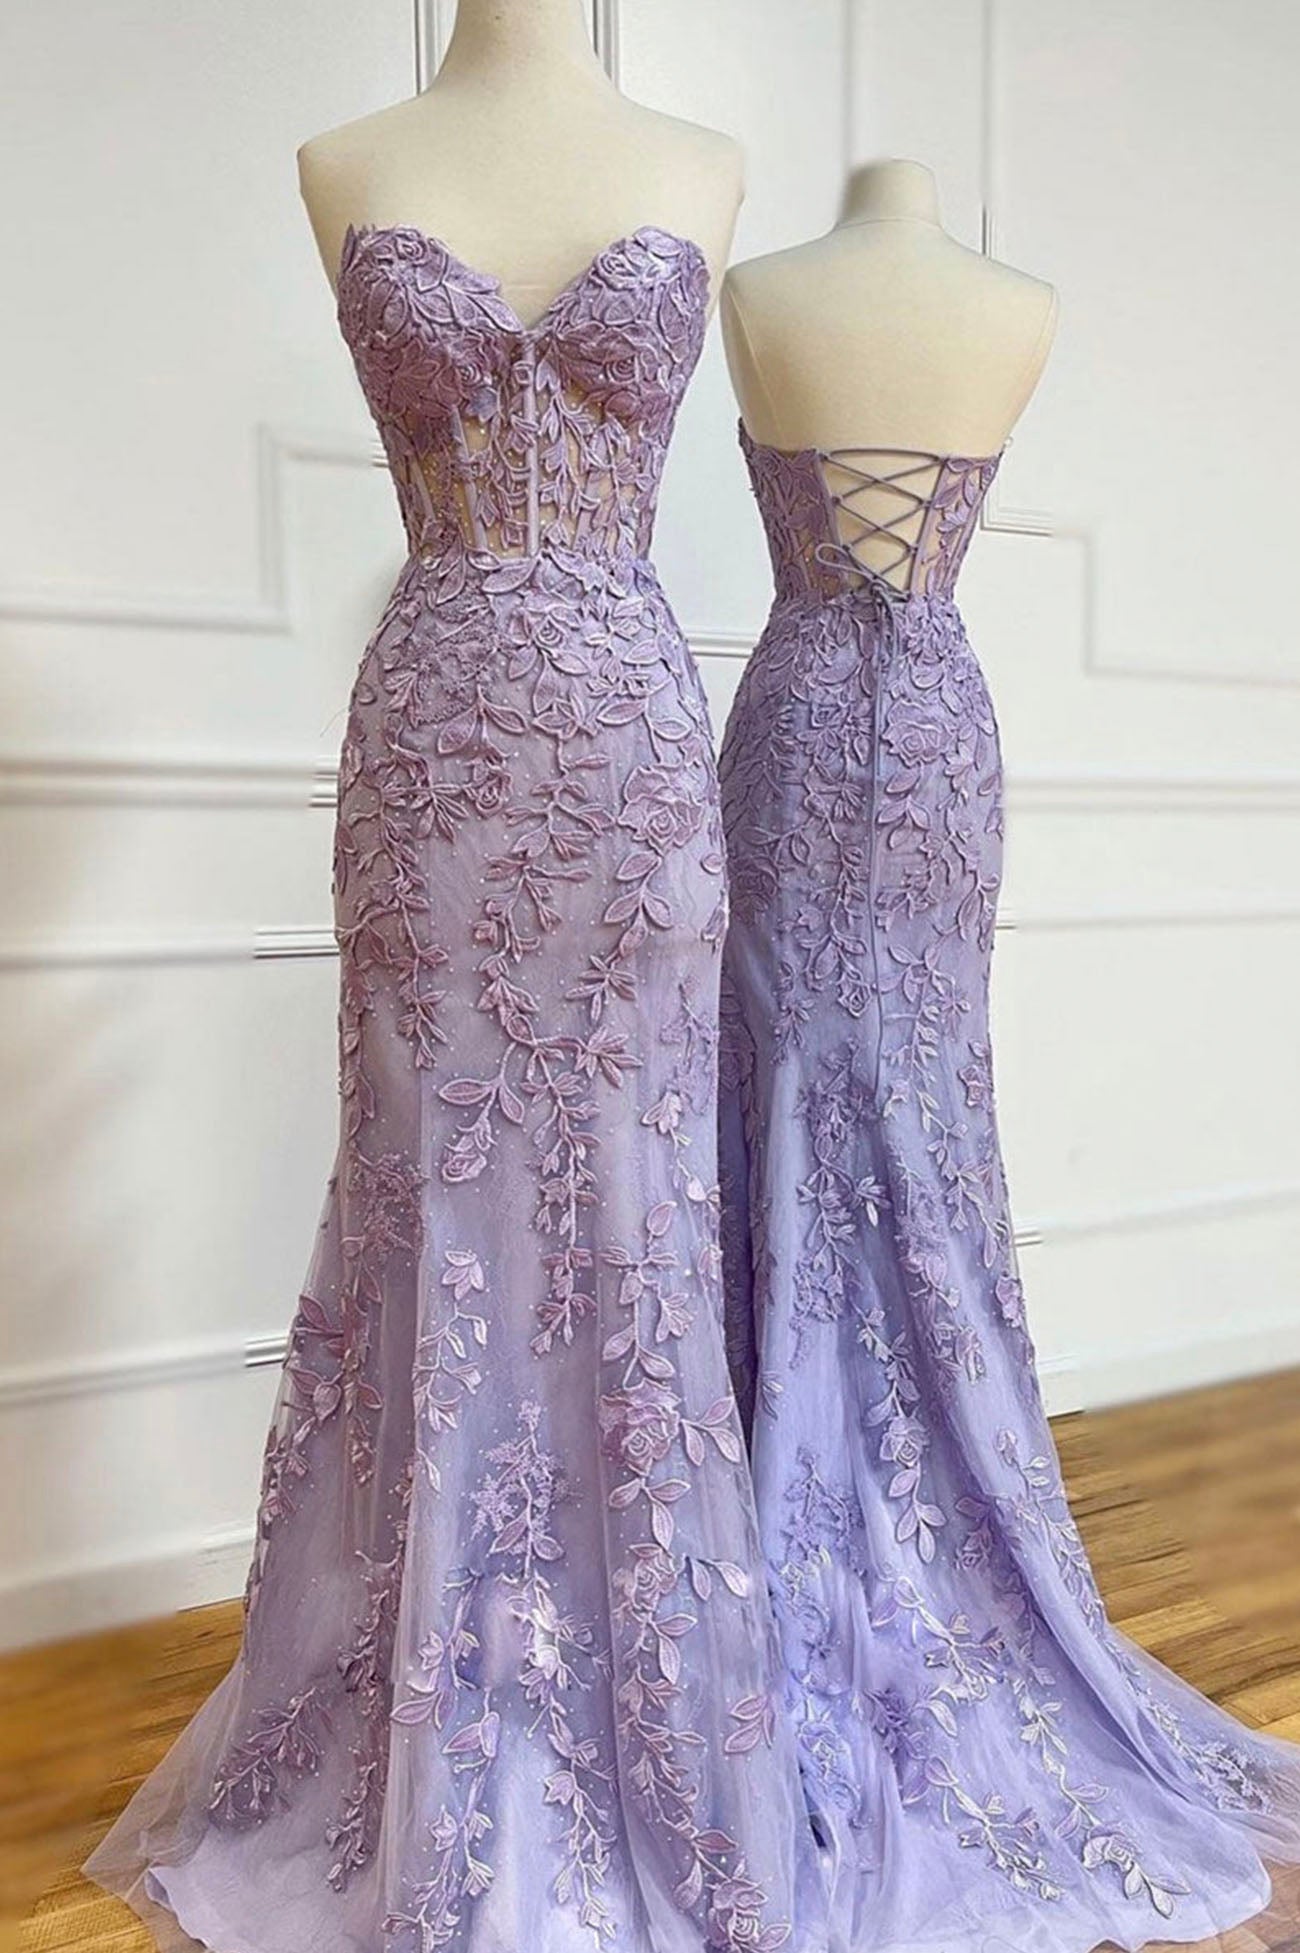 Party Dresses For Teen, Purple Lace Long Mermaid Prom Dresses, Strapless Evening Dresses